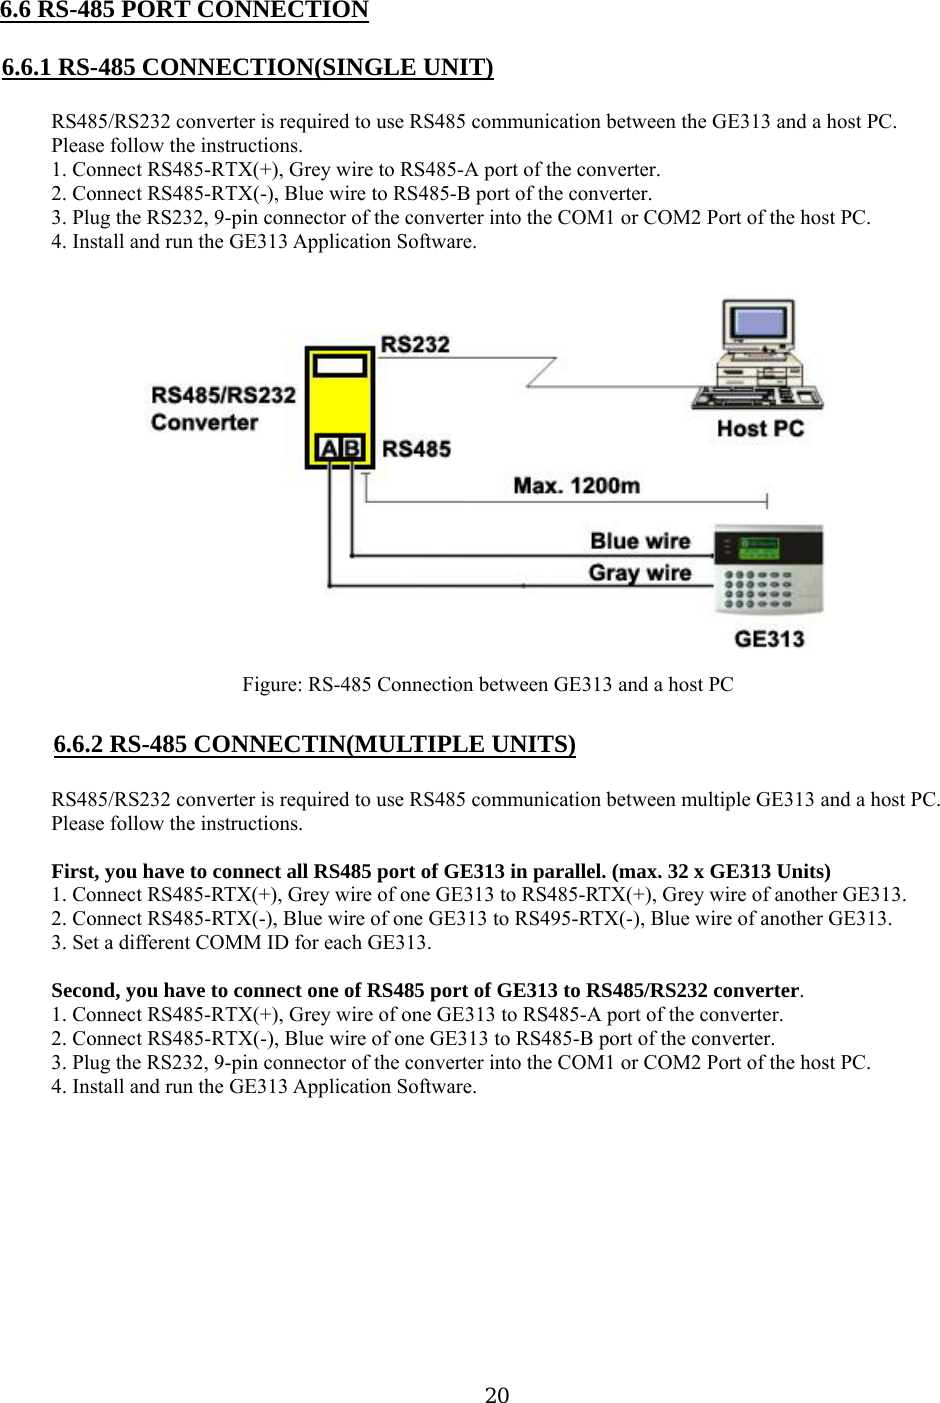  20 U6.6 RS-485 PORT CONNECTION  U6.6.1 RS-485 CONNECTION(SINGLE UNIT)  RS485/RS232 converter is required to use RS485 communication between the GE313 and a host PC. Please follow the instructions. 1. Connect RS485-RTX(+), Grey wire to RS485-A port of the converter. 2. Connect RS485-RTX(-), Blue wire to RS485-B port of the converter. 3. Plug the RS232, 9-pin connector of the converter into the COM1 or COM2 Port of the host PC. 4. Install and run the GE313 Application Software.  Figure: RS-485 Connection between GE313 and a host PC  U6.6.2 RS-485 CONNECTIN(MULTIPLE UNITS)  RS485/RS232 converter is required to use RS485 communication between multiple GE313 and a host PC. Please follow the instructions.  First, you have to connect all RS485 port of GE313 in parallel. (max. 32 x GE313 Units) 1. Connect RS485-RTX(+), Grey wire of one GE313 to RS485-RTX(+), Grey wire of another GE313. 2. Connect RS485-RTX(-), Blue wire of one GE313 to RS495-RTX(-), Blue wire of another GE313. 3. Set a different COMM ID for each GE313.  Second, you have to connect one of RS485 port of GE313 to RS485/RS232 converter. 1. Connect RS485-RTX(+), Grey wire of one GE313 to RS485-A port of the converter. 2. Connect RS485-RTX(-), Blue wire of one GE313 to RS485-B port of the converter. 3. Plug the RS232, 9-pin connector of the converter into the COM1 or COM2 Port of the host PC. 4. Install and run the GE313 Application Software. 